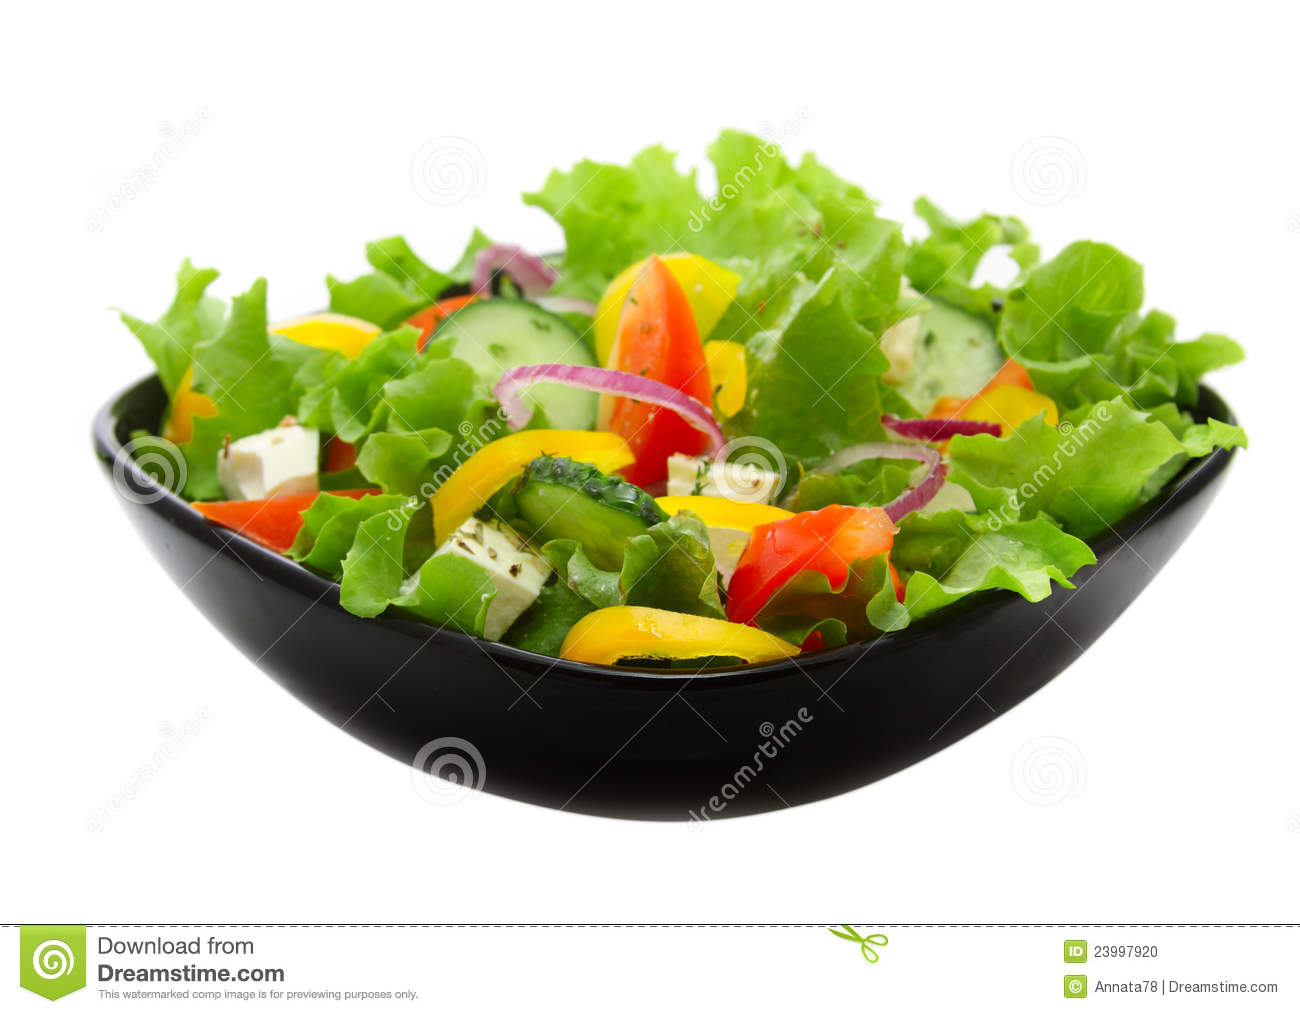 Vegetable Salad In Black Square Plate Stock Photo   Image  23997920